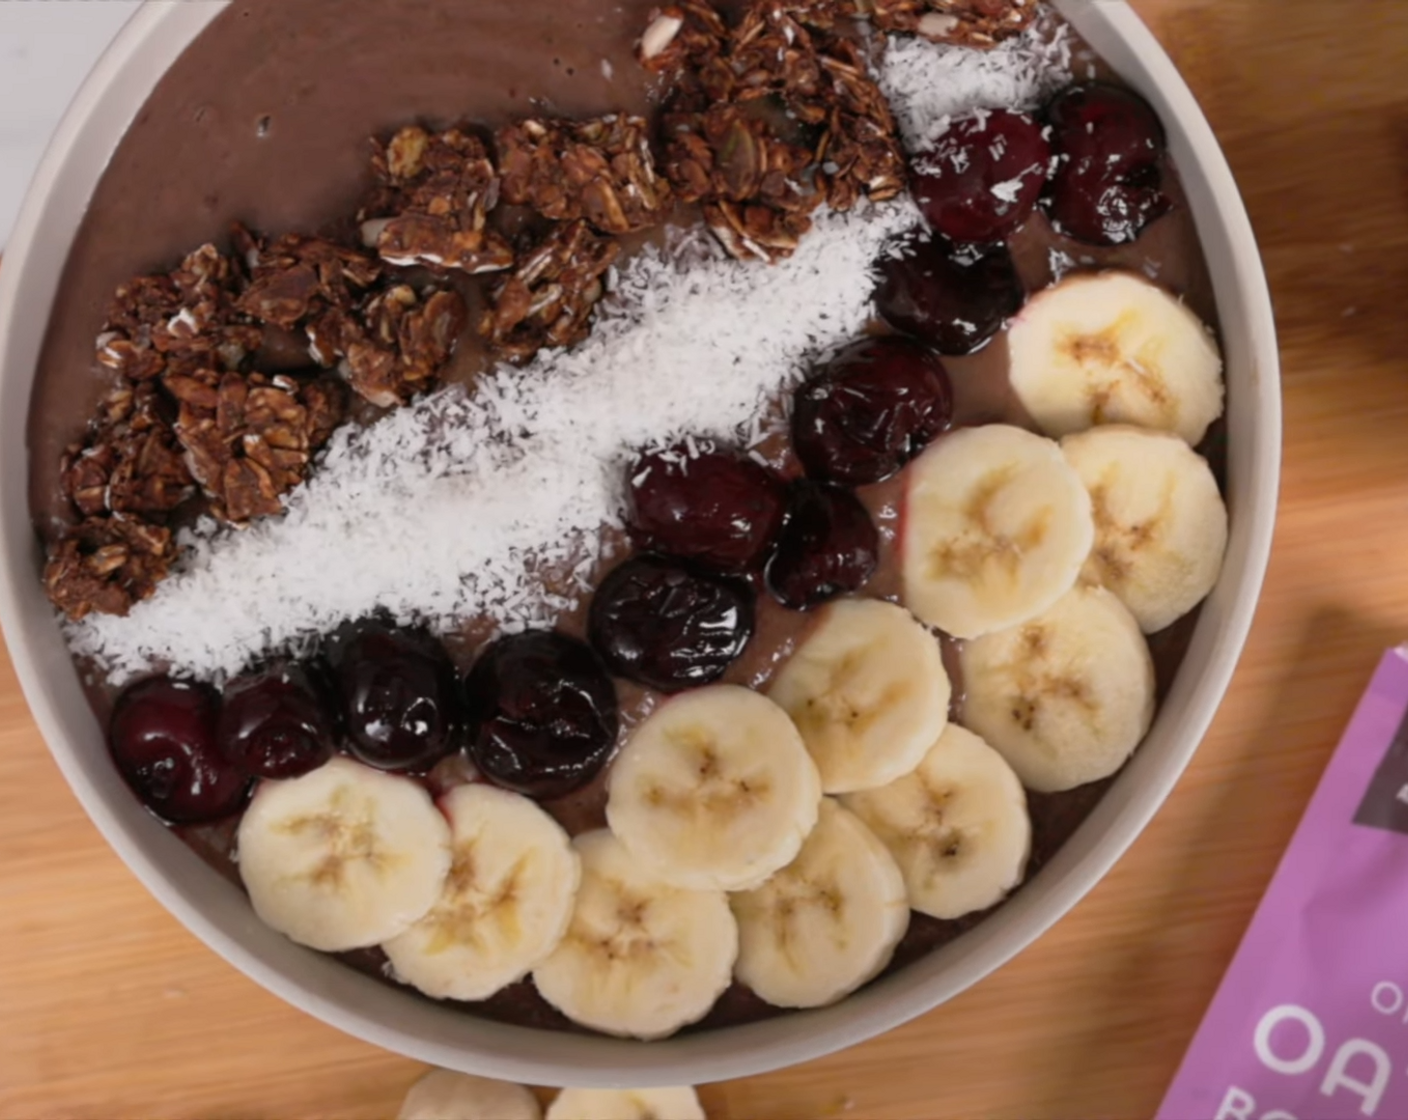 step 2 Pour smoothie into a bowl. Top with Chocolate Oat Clusters (to taste), Unsweetened Shredded Coconut (1/4 cup), Bananas (to taste), and Cherries (to taste) on top of the smoothie bowl.